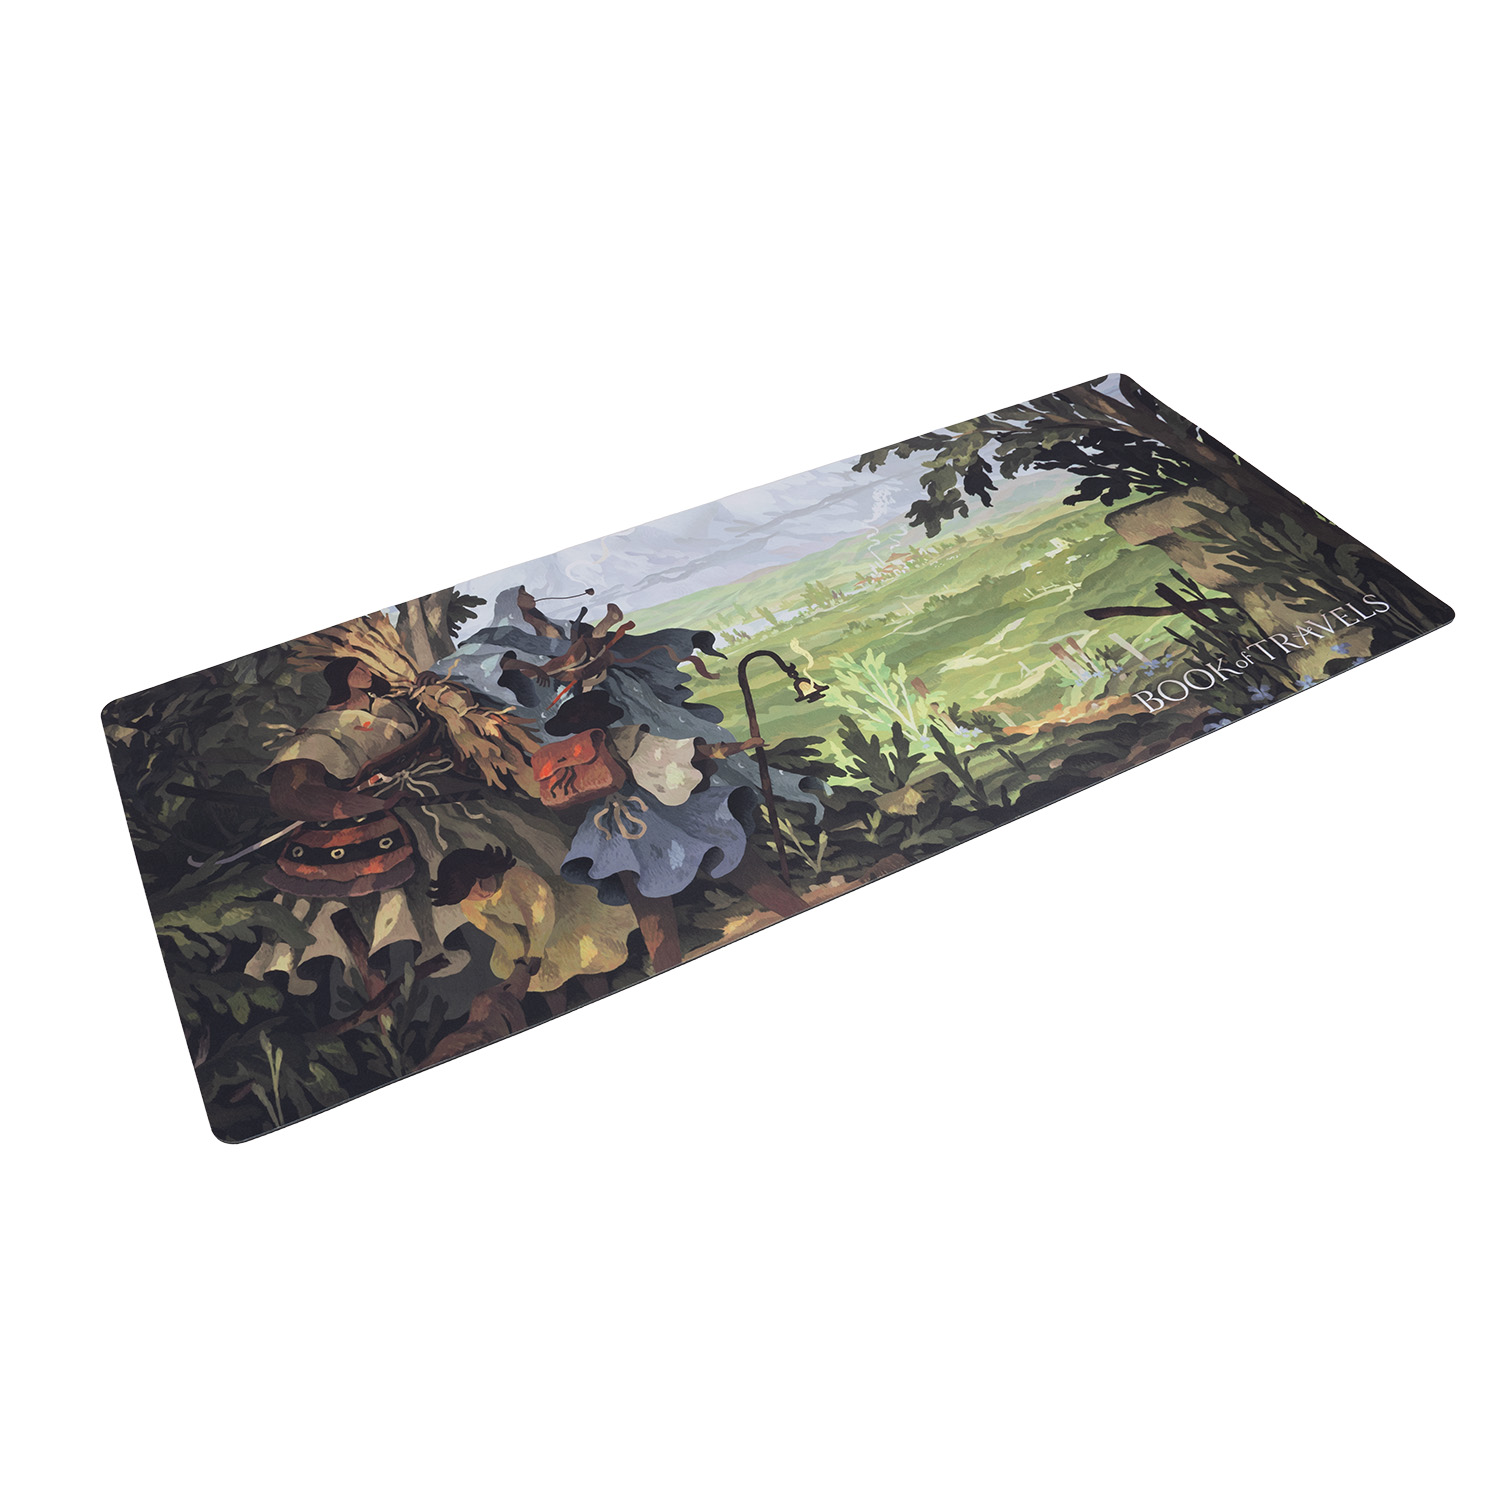 Book of Travels Mousepad: Green Wanderlust (XXXL size)product zoom image #2